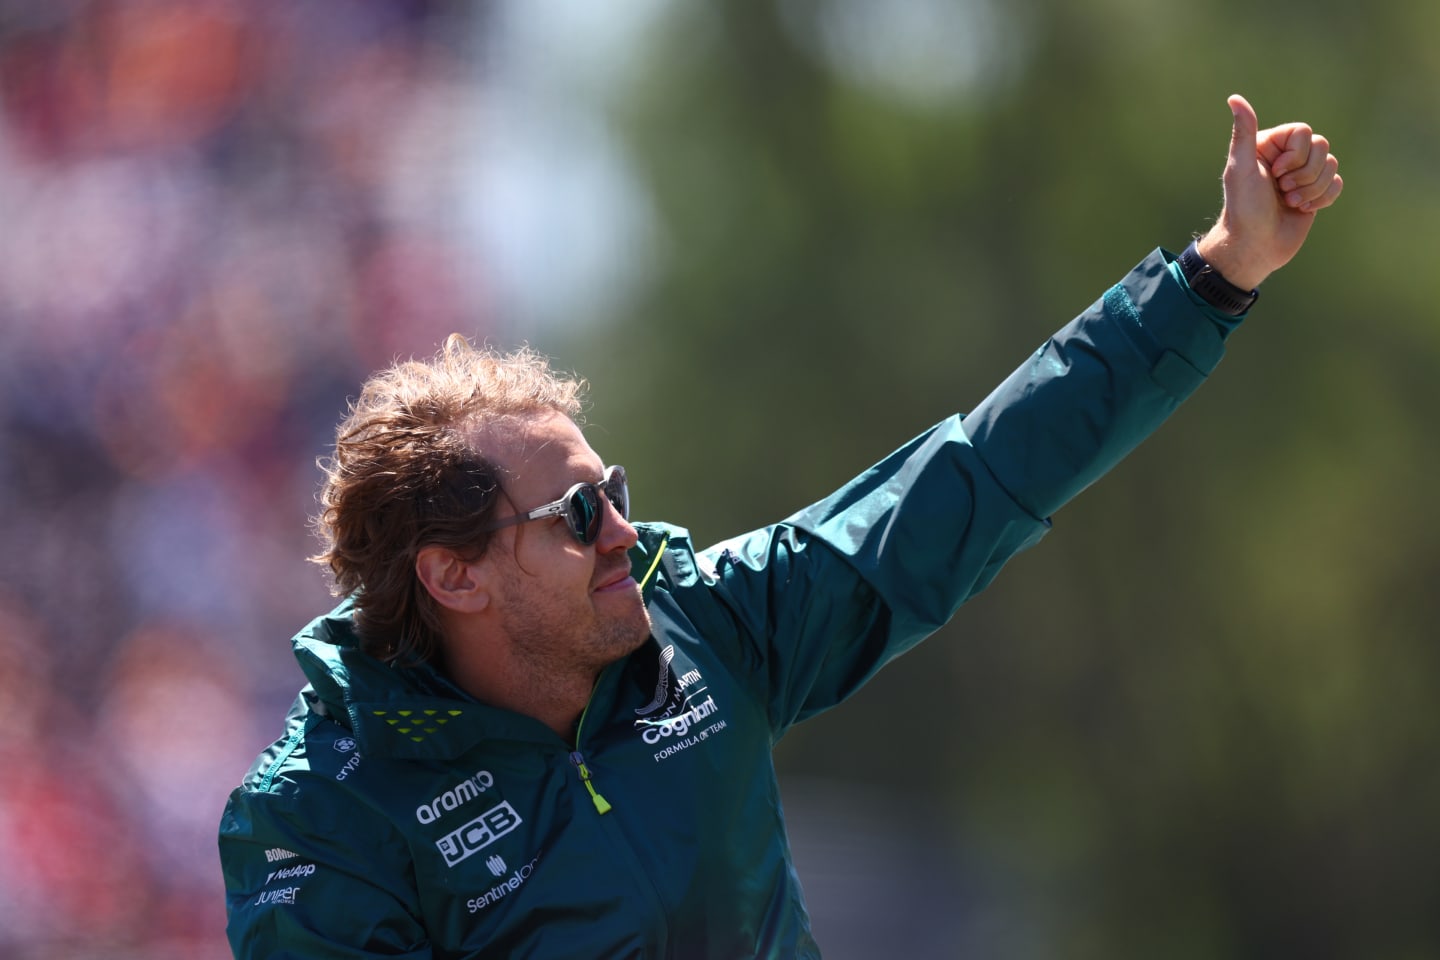 MONTREAL, QUEBEC - JUNE 19: Sebastian Vettel of Germany and Aston Martin F1 Team waves to the crowd from the drivers parade ahead of the F1 Grand Prix of Canada at Circuit Gilles Villeneuve on June 19, 2022 in Montreal, Quebec. (Photo by Clive Rose/Getty Images)